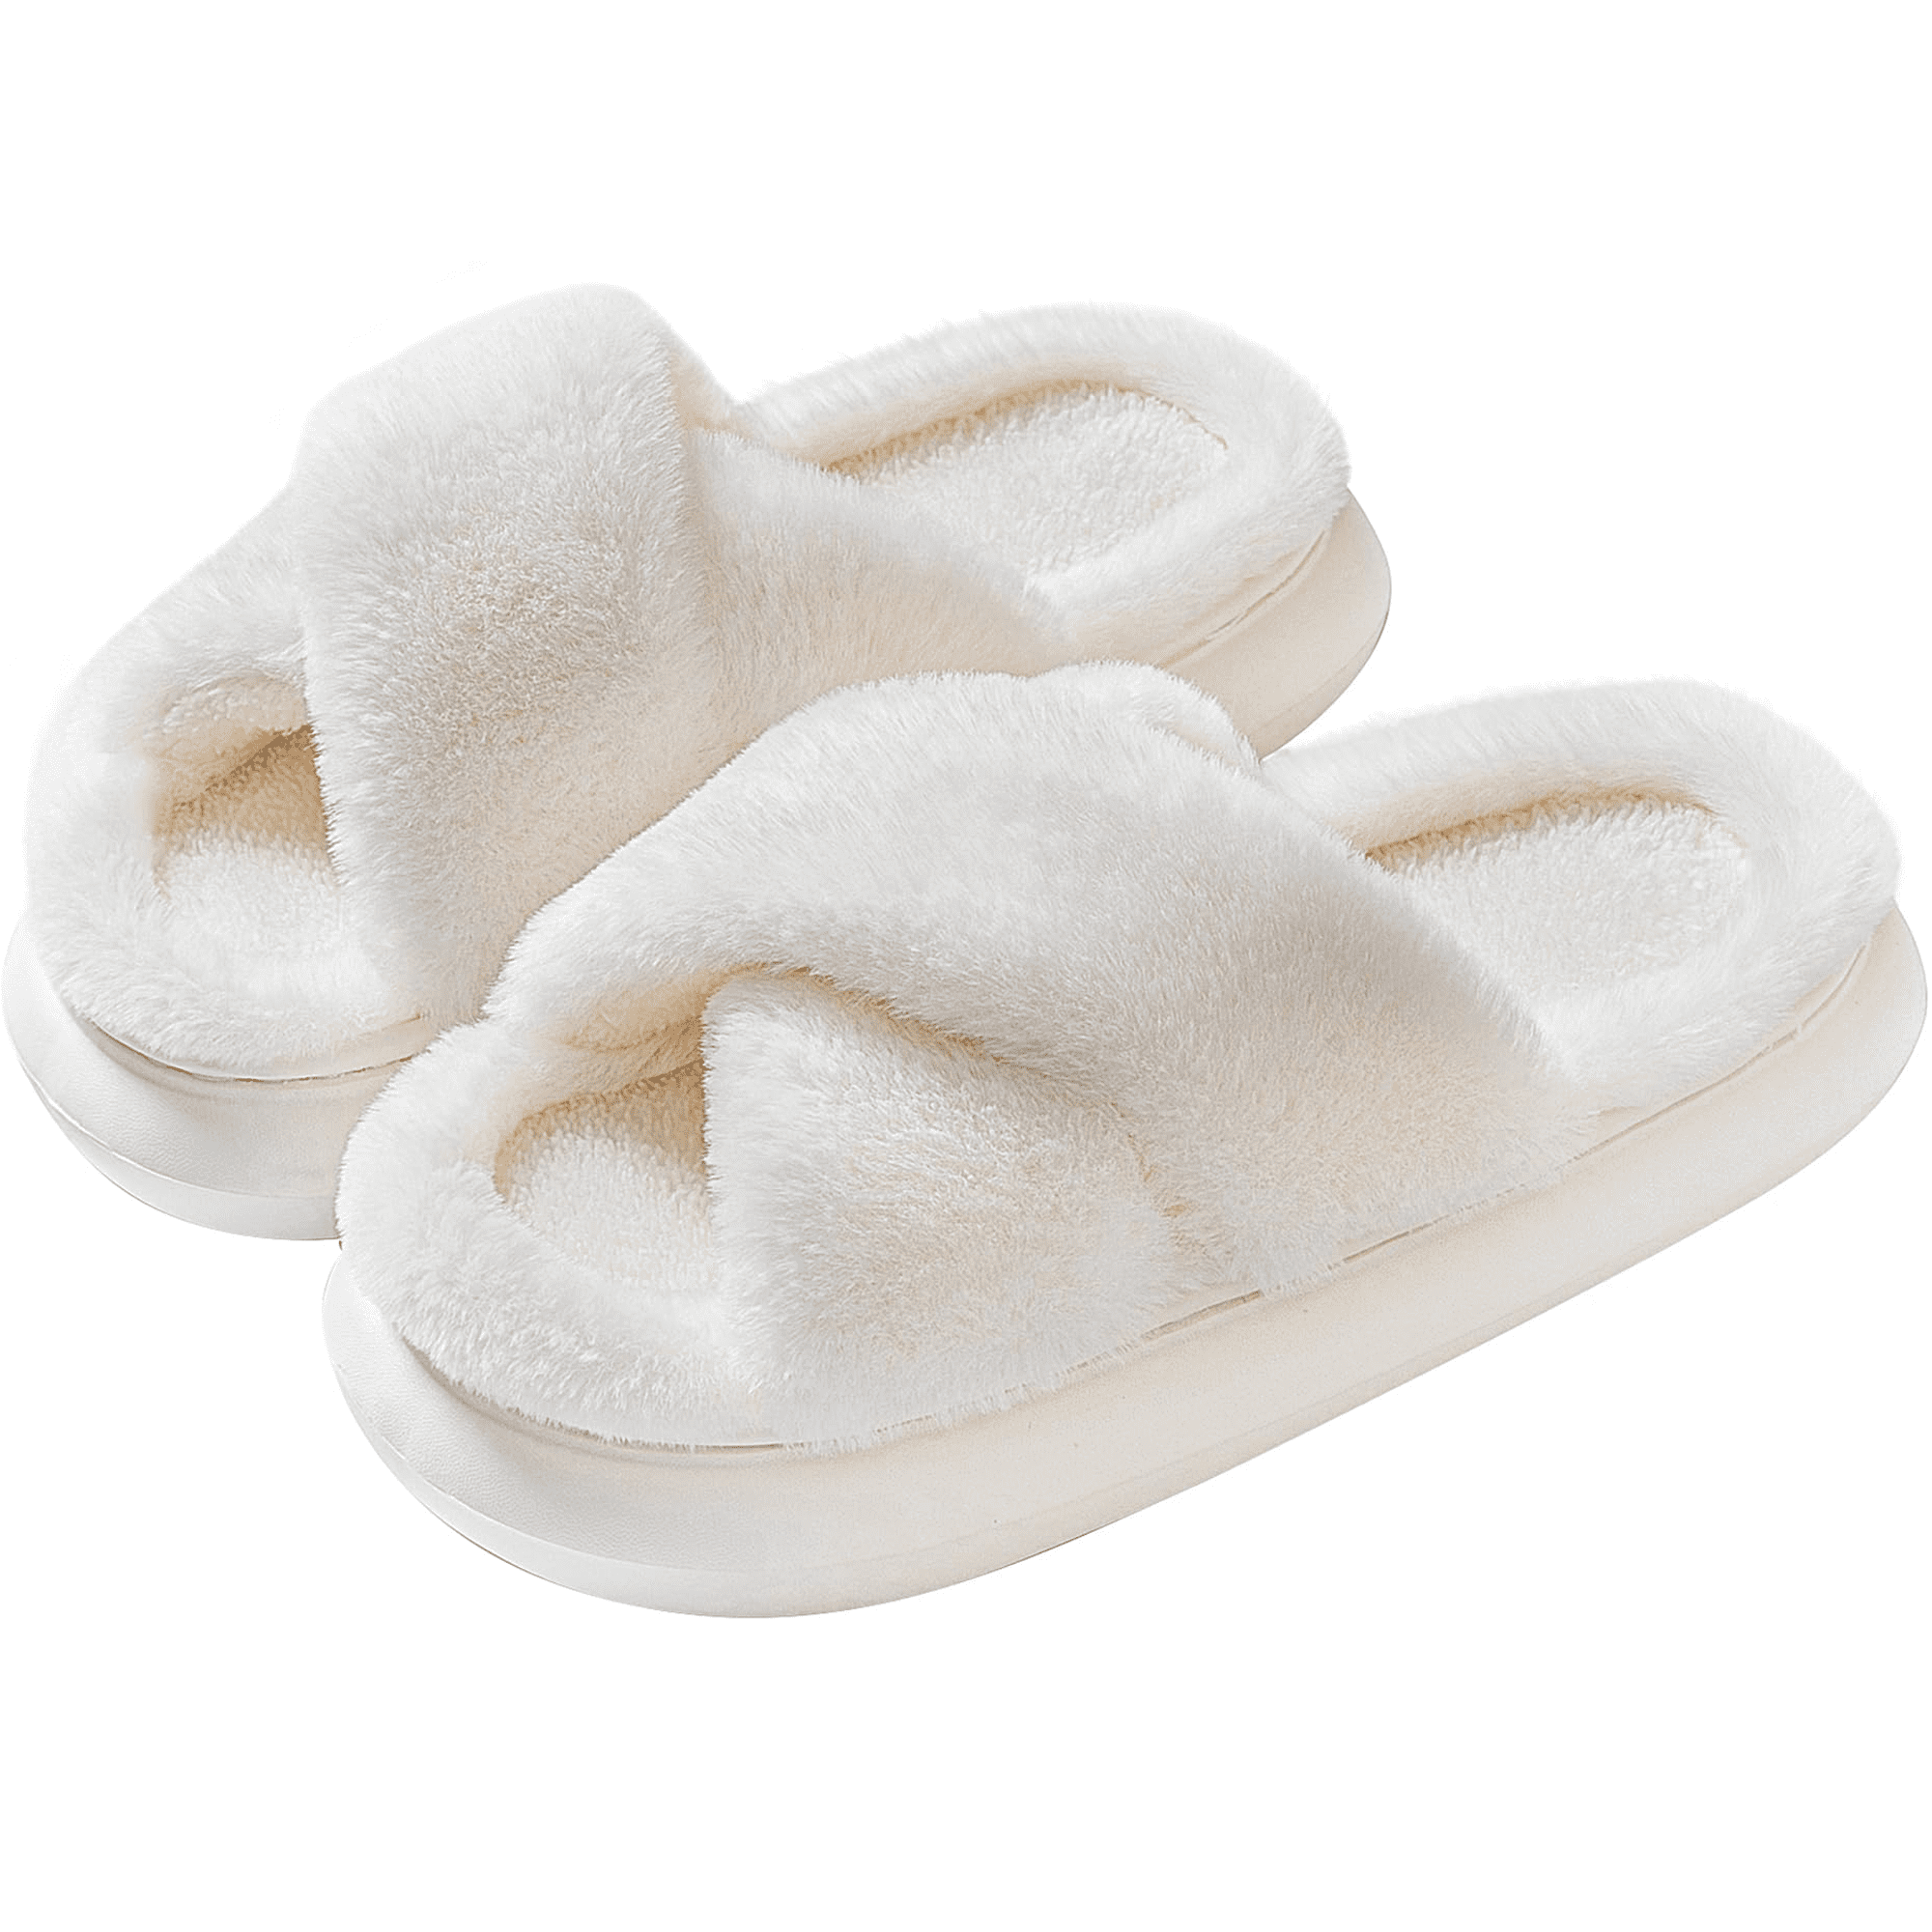 Slippers for Women Indoor, Women's Fuzzy Slippers, Cross Band Slippers ...